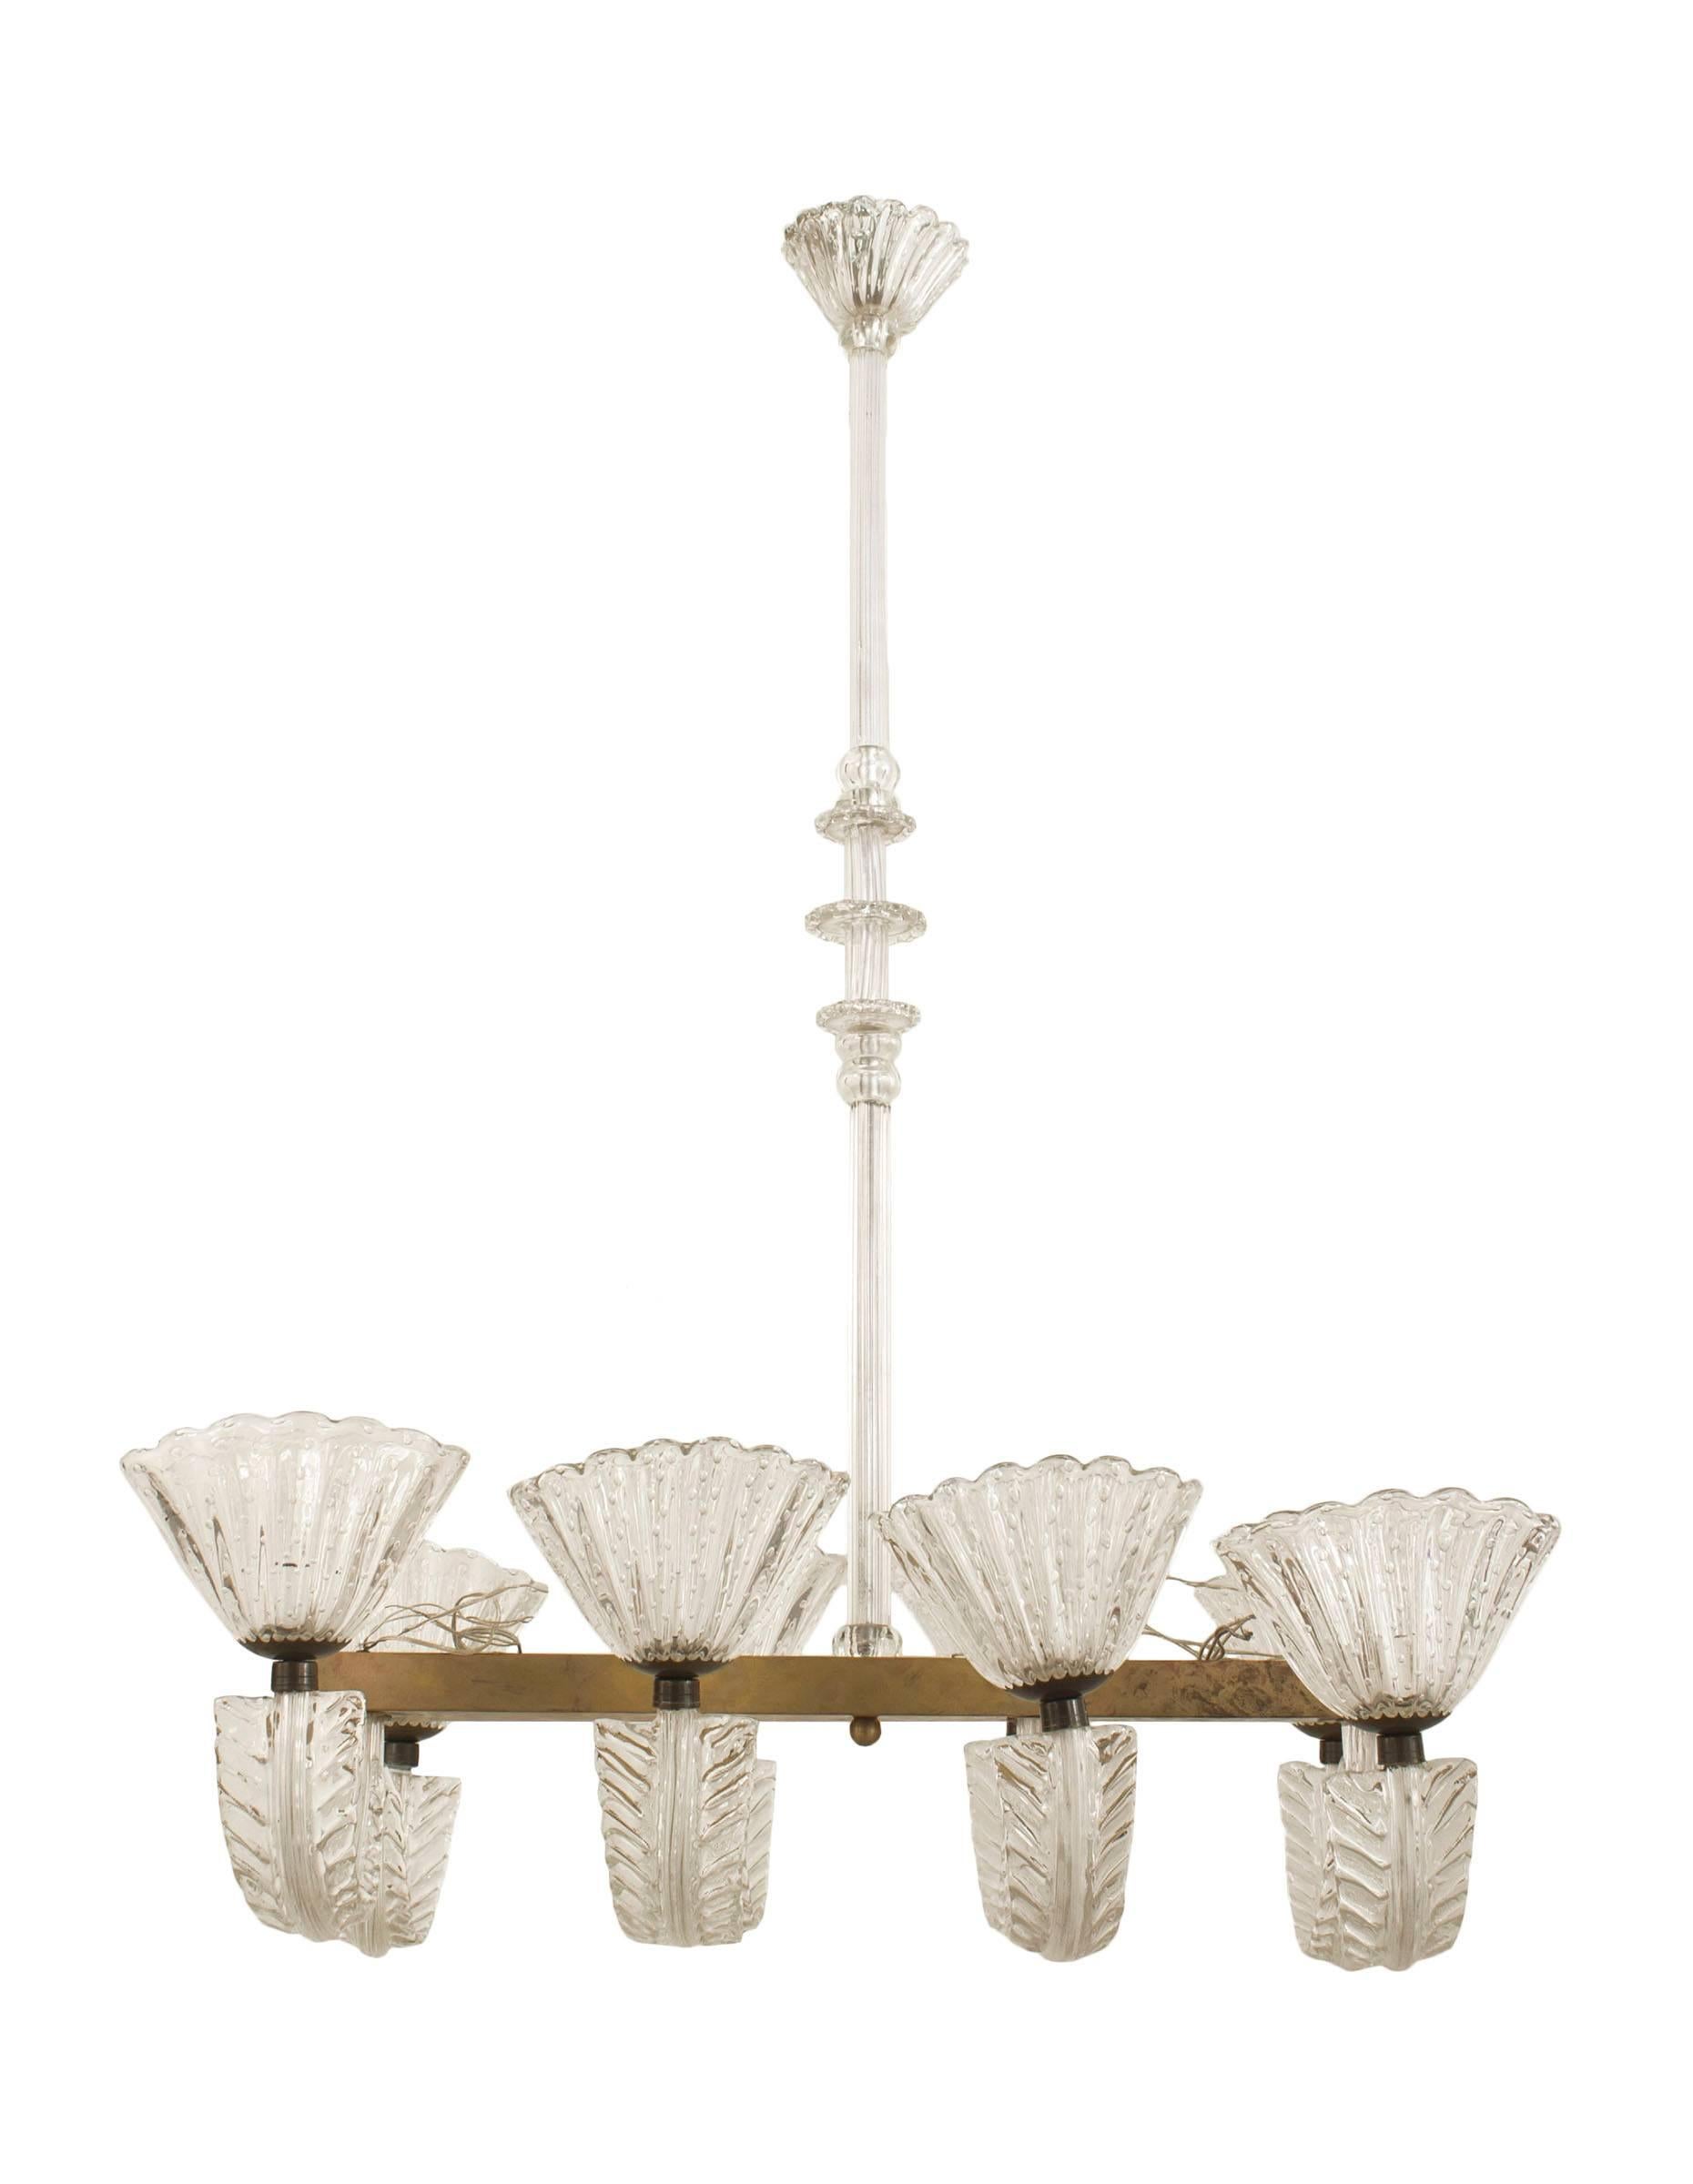 Italian Mid-Century (1940s) chandelier with horizontal metal frame having 4 Pair of feather form clear glass arms supporting large internal bubble design oval shades with a tiered centerpost (BAROVIER ET TOSO)
